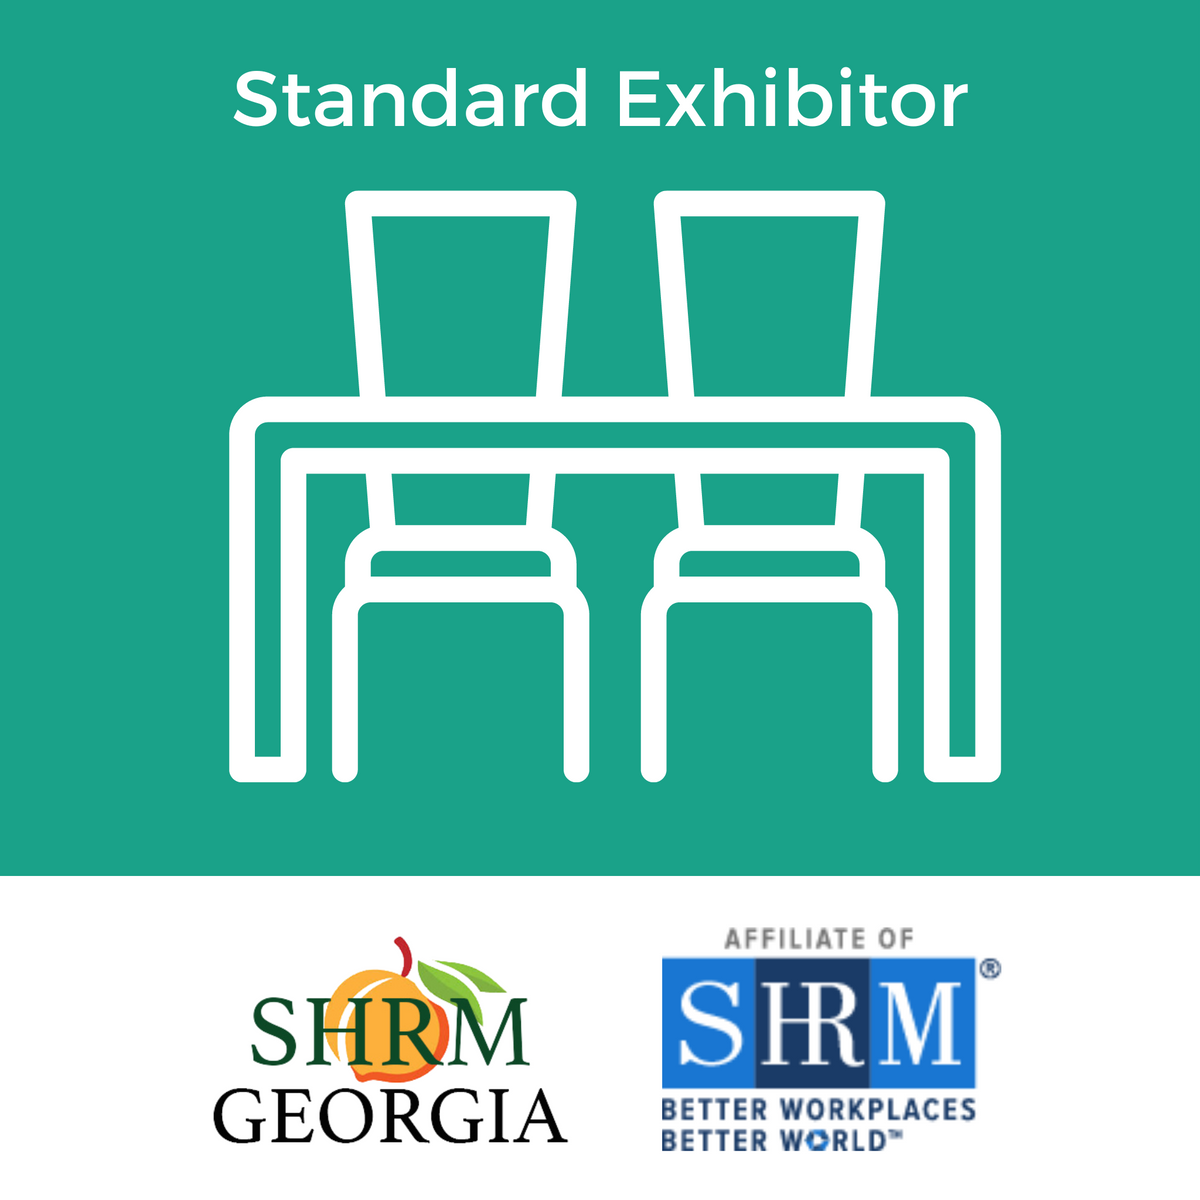 23 GA SHRM Law Conference - Exhibitor Package